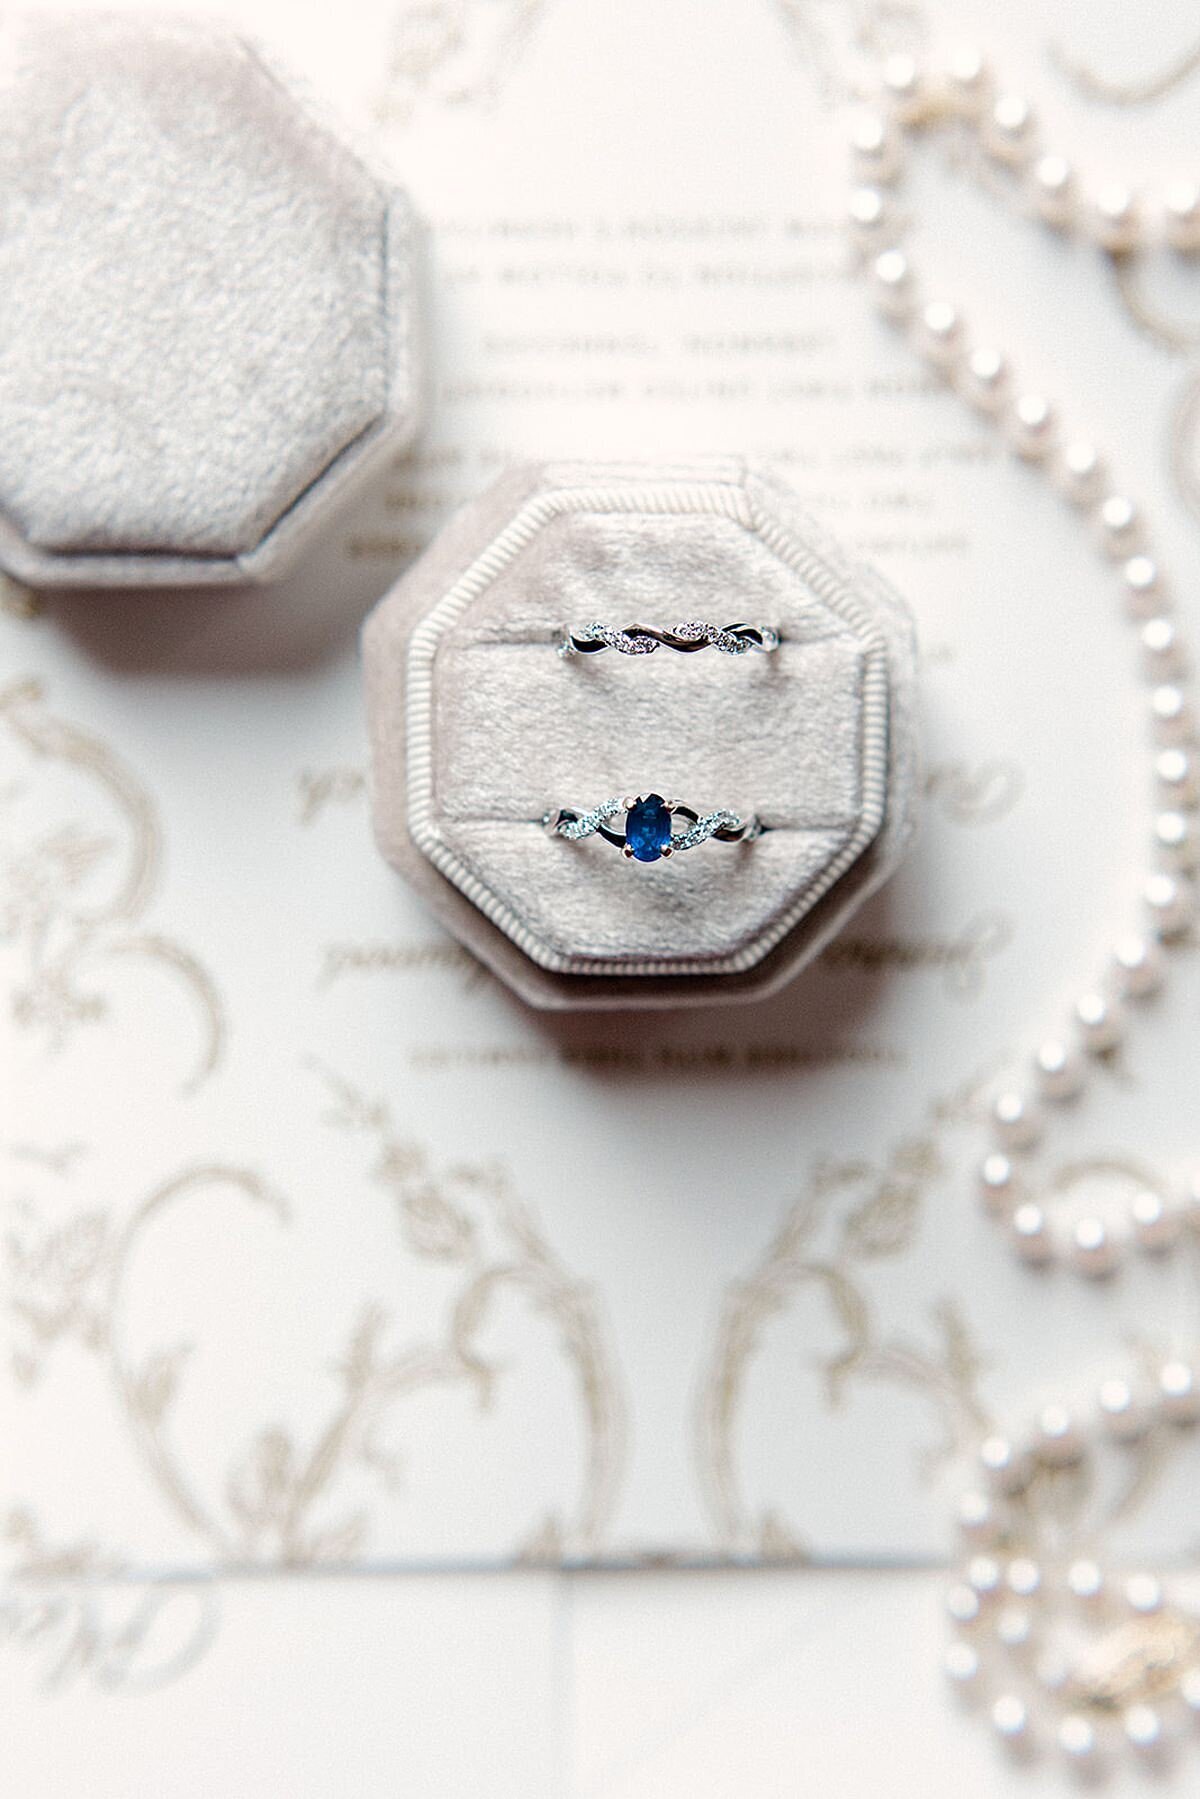 A white velvet ring box with an oval cut sapphire and diamond engagement ring and interwoven diamond wedding band on a table next to a pearl necklace.